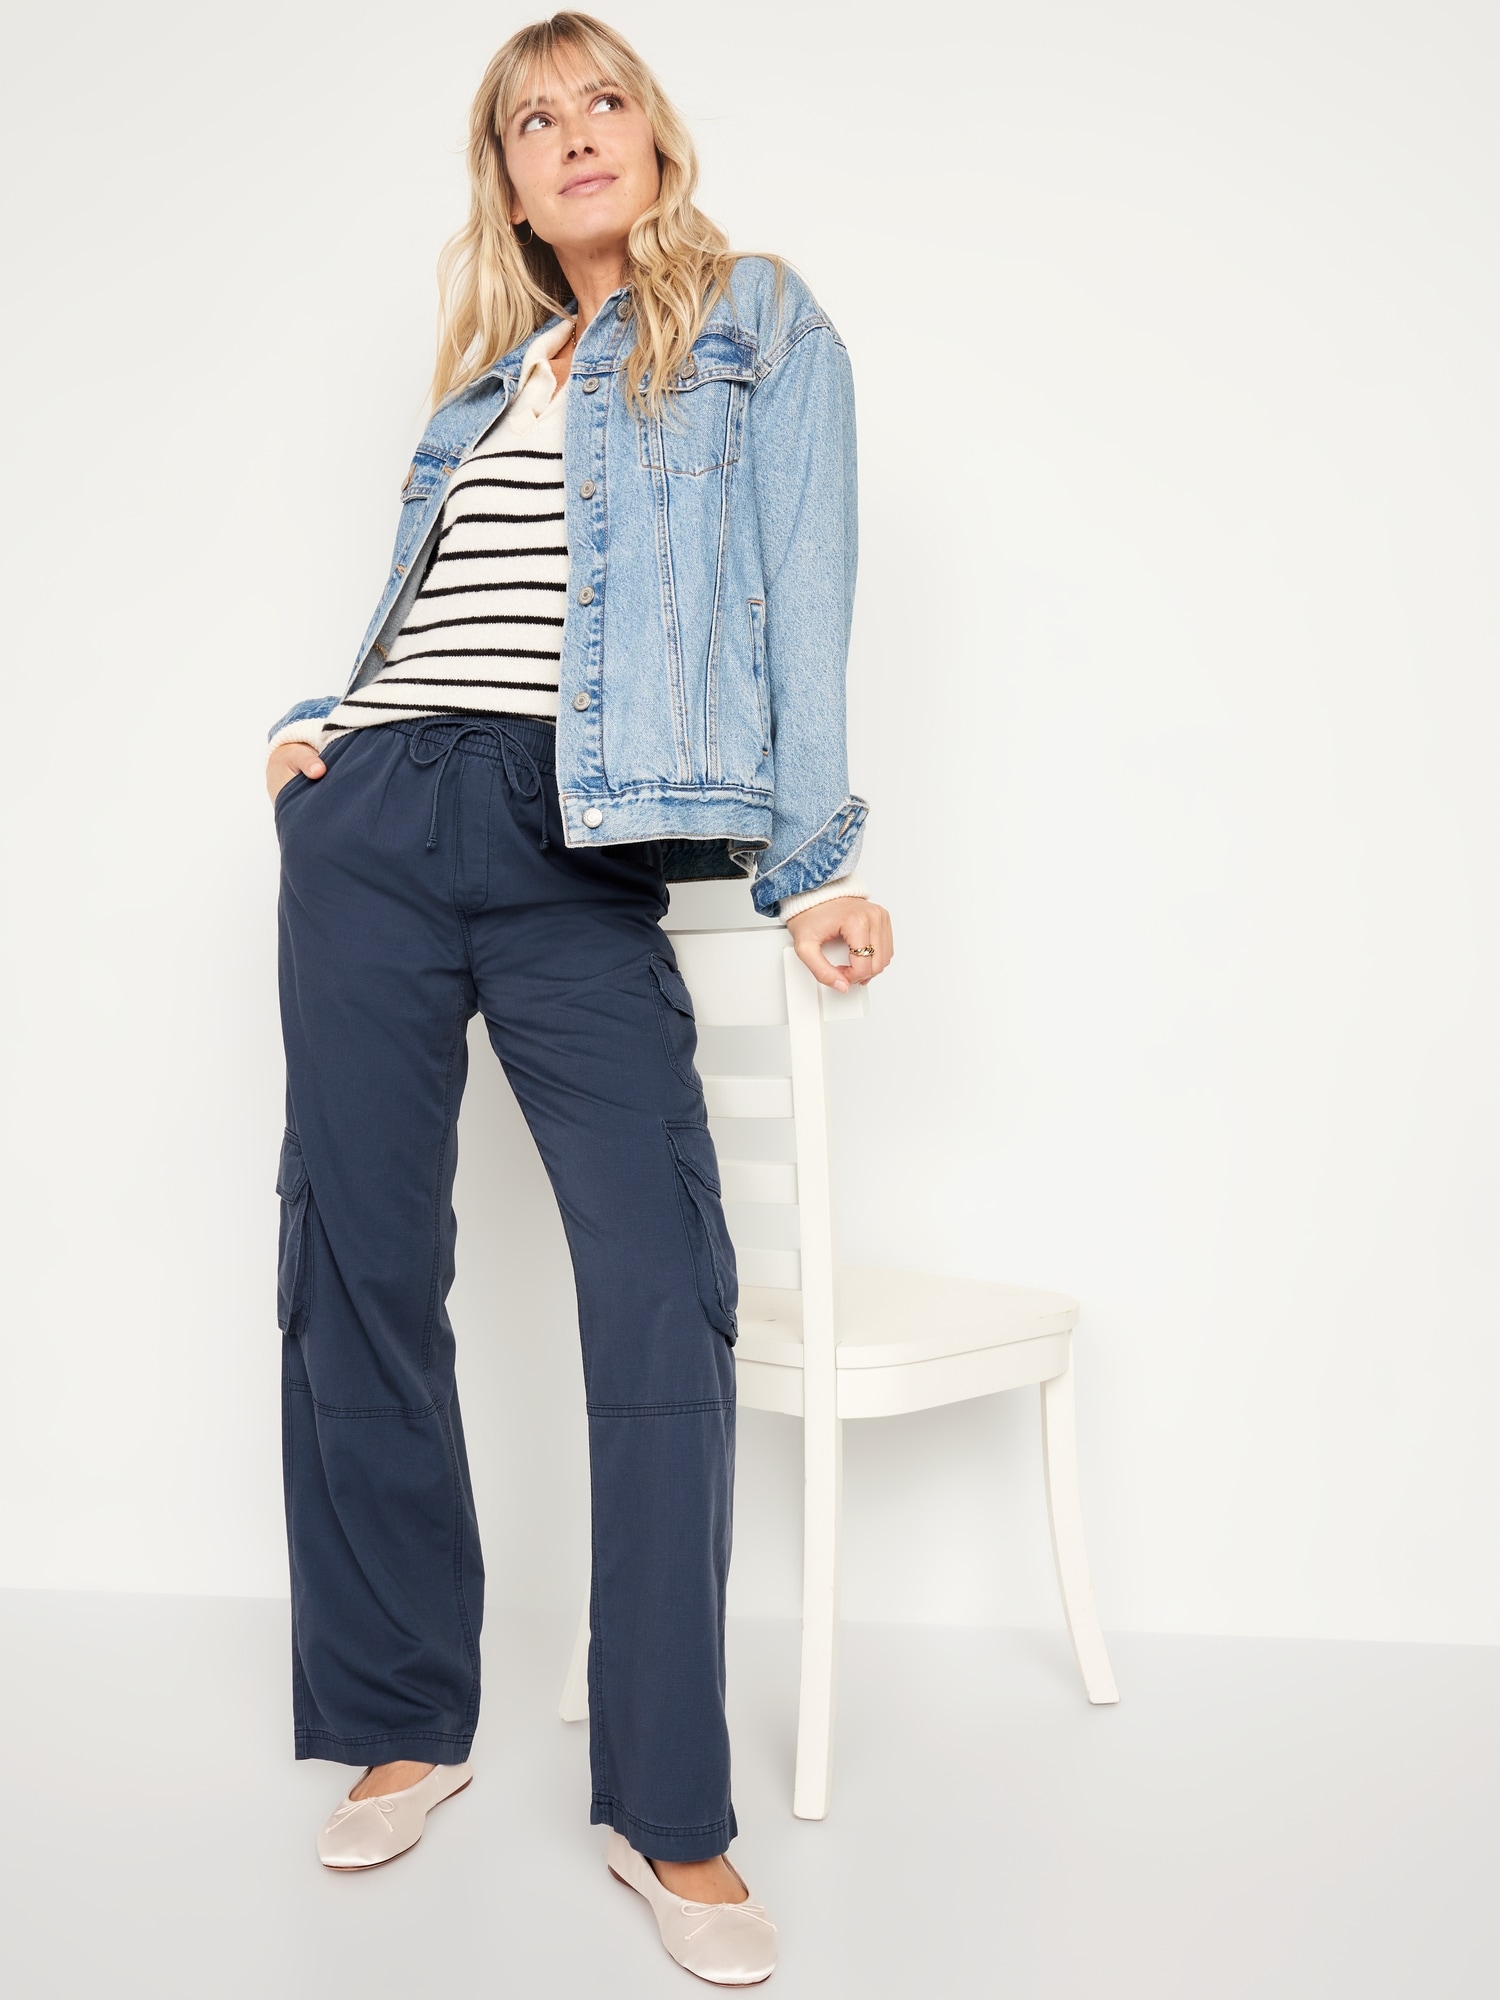 UNIONBAY Style Guide: Super High-Waisted Pants Outfits